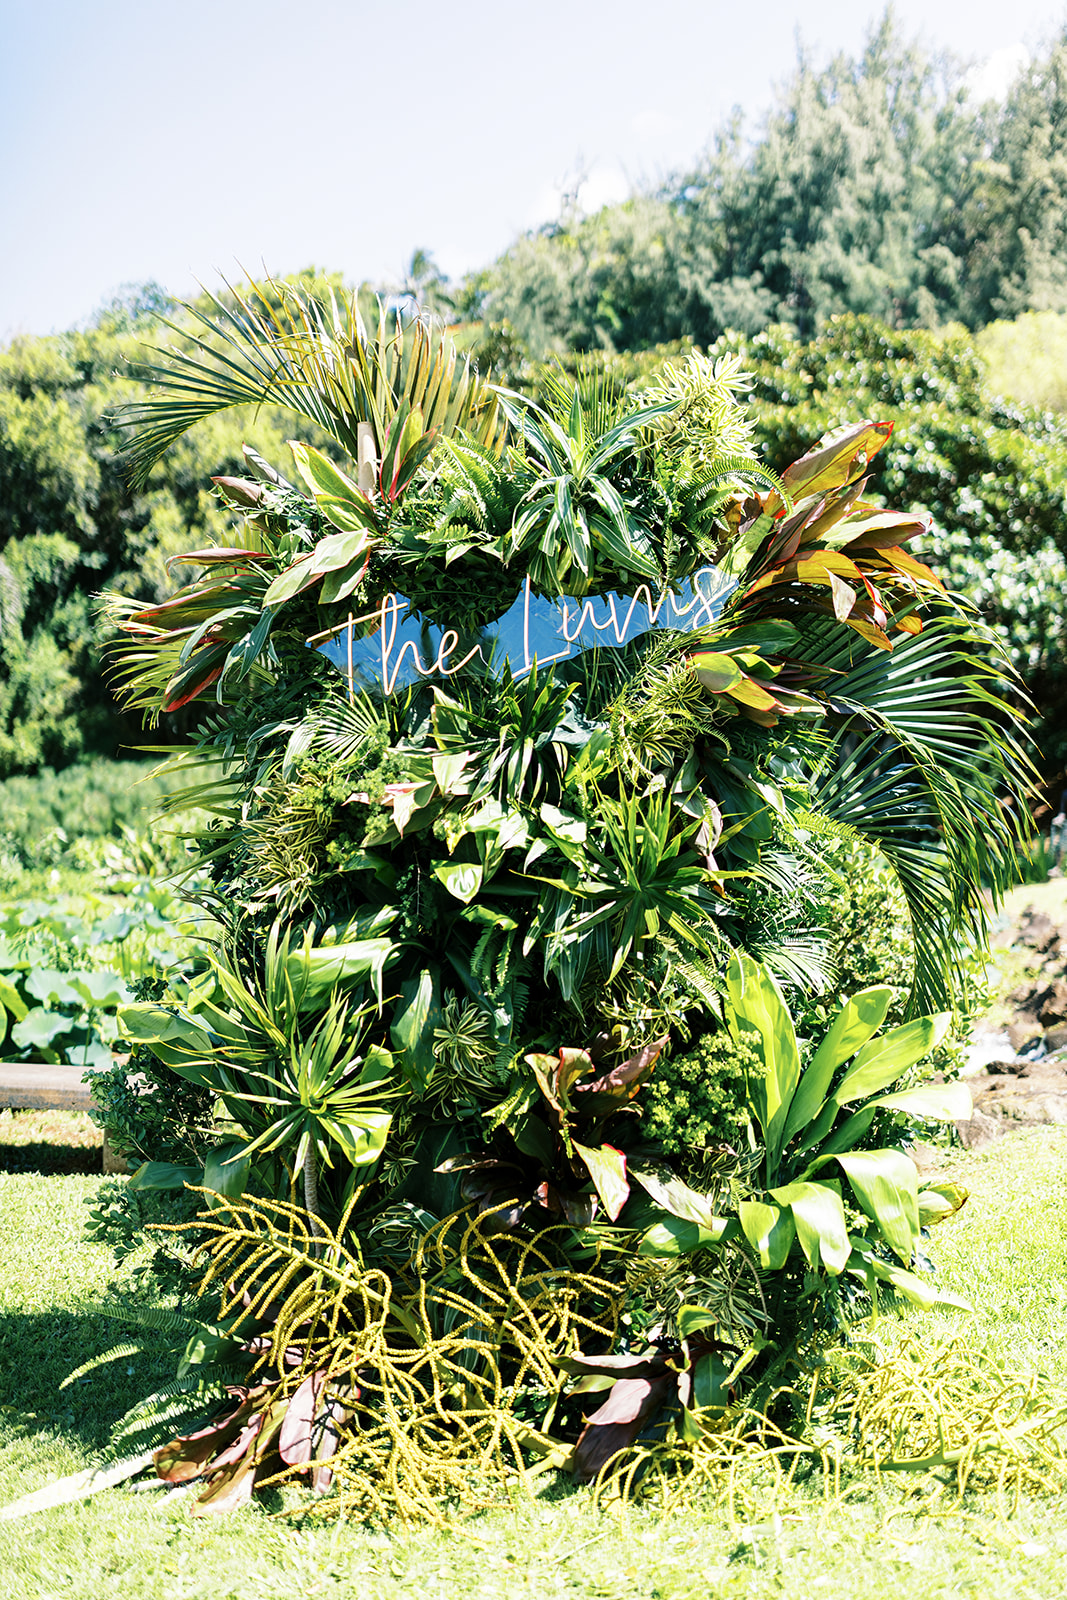 A lush, tropical foliage arrangement with a sign saying "the menu" nestled within the greenery.